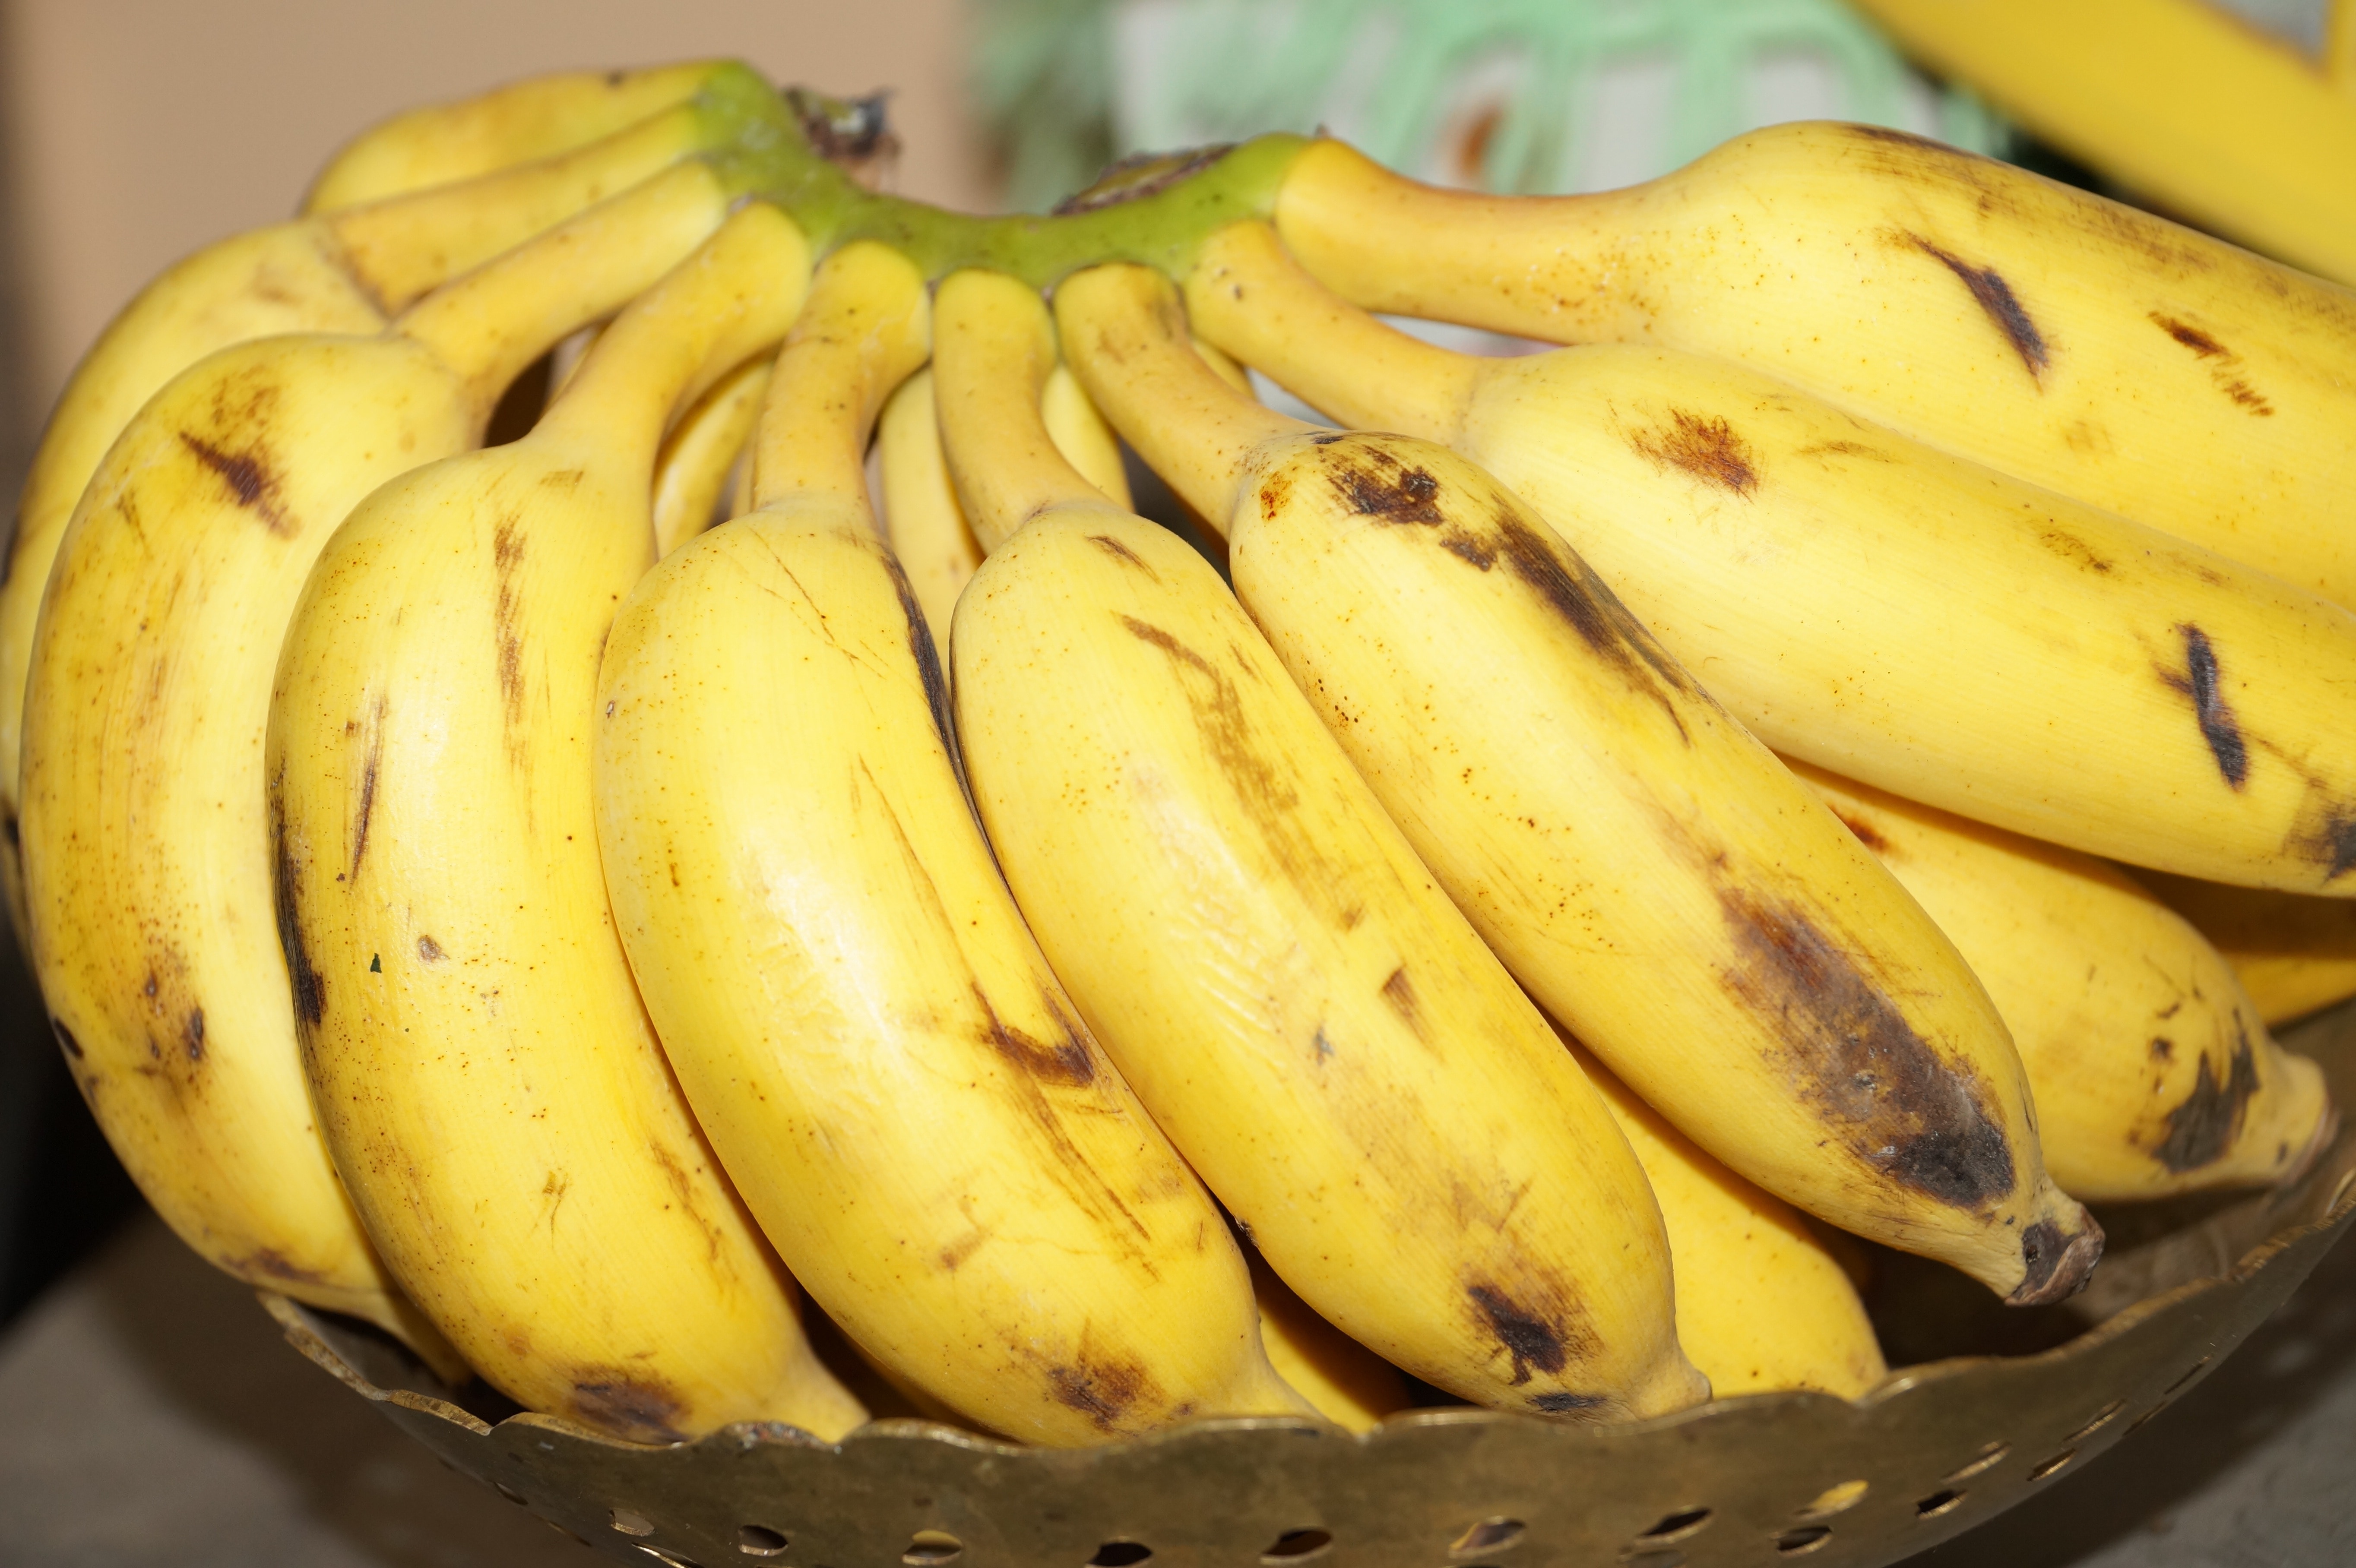 Bananas, Fruit, Ripe, Ready To Eat, food and drink, food